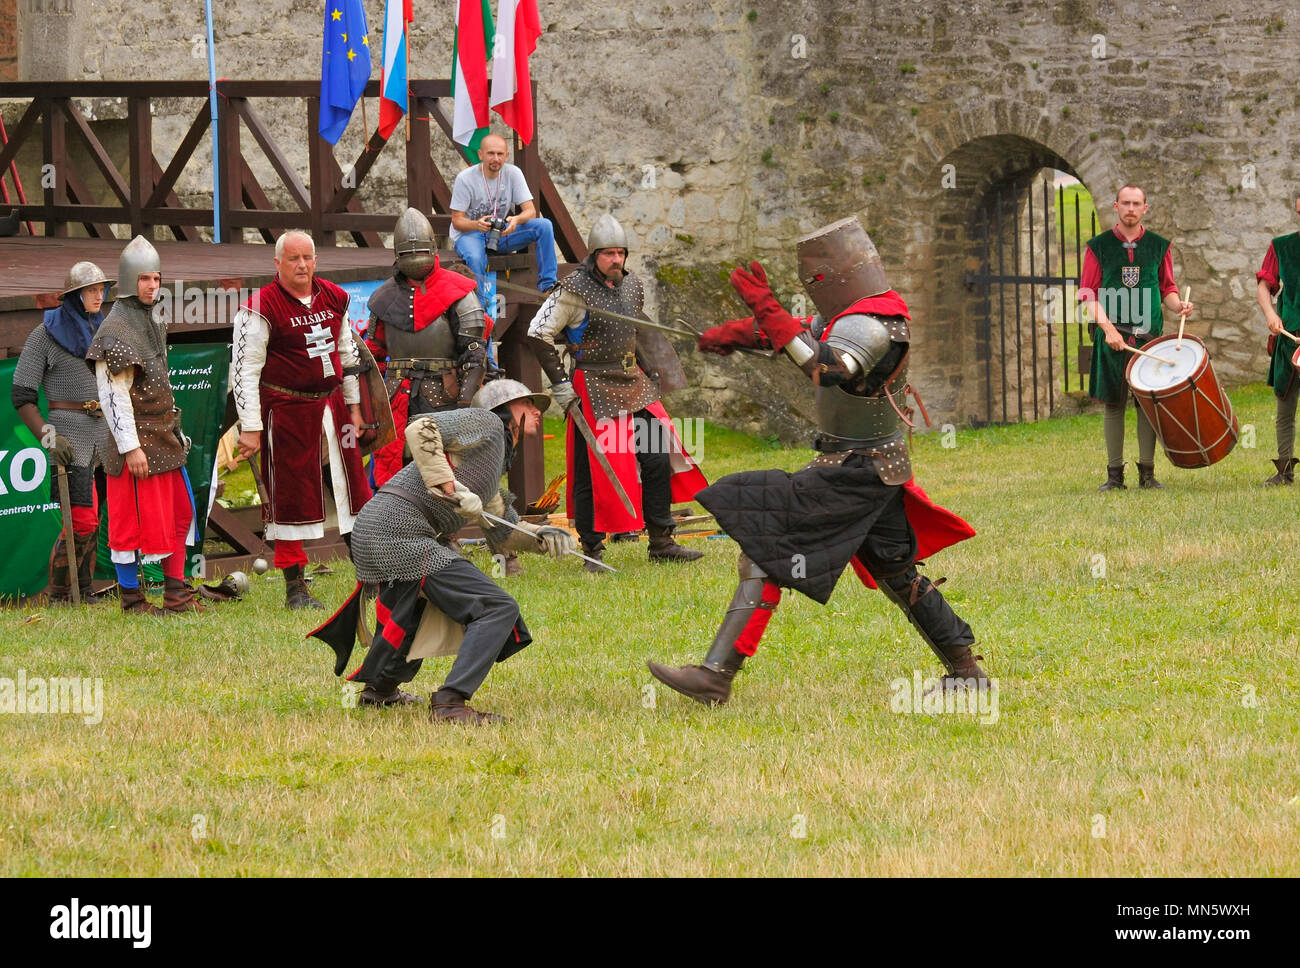 Infantry warriors combat show by members of The Knightly Order of St. George of Visegrad (Hungary). 'Knight's Tournament with Plum'. Szydlow, Poland. Stock Photo